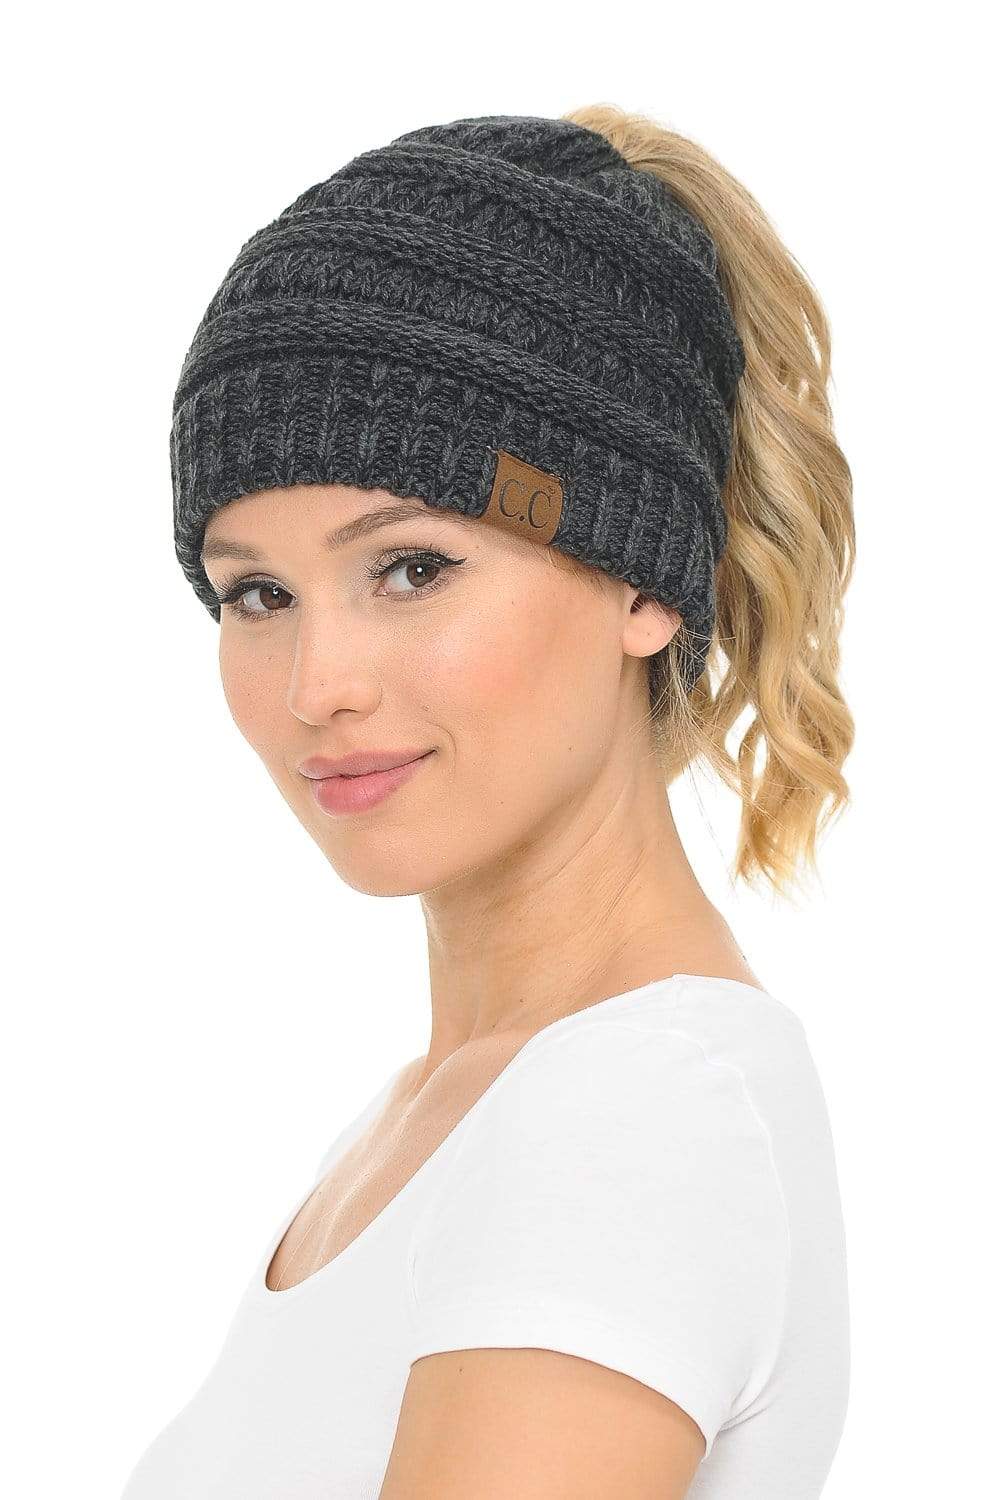 C.C Apparel Black Grey Mix C.C MB6242 - Soft Stretch Cable Knit Warm Ponytail Hat 3 Toned Mixed Multi Color Beanie